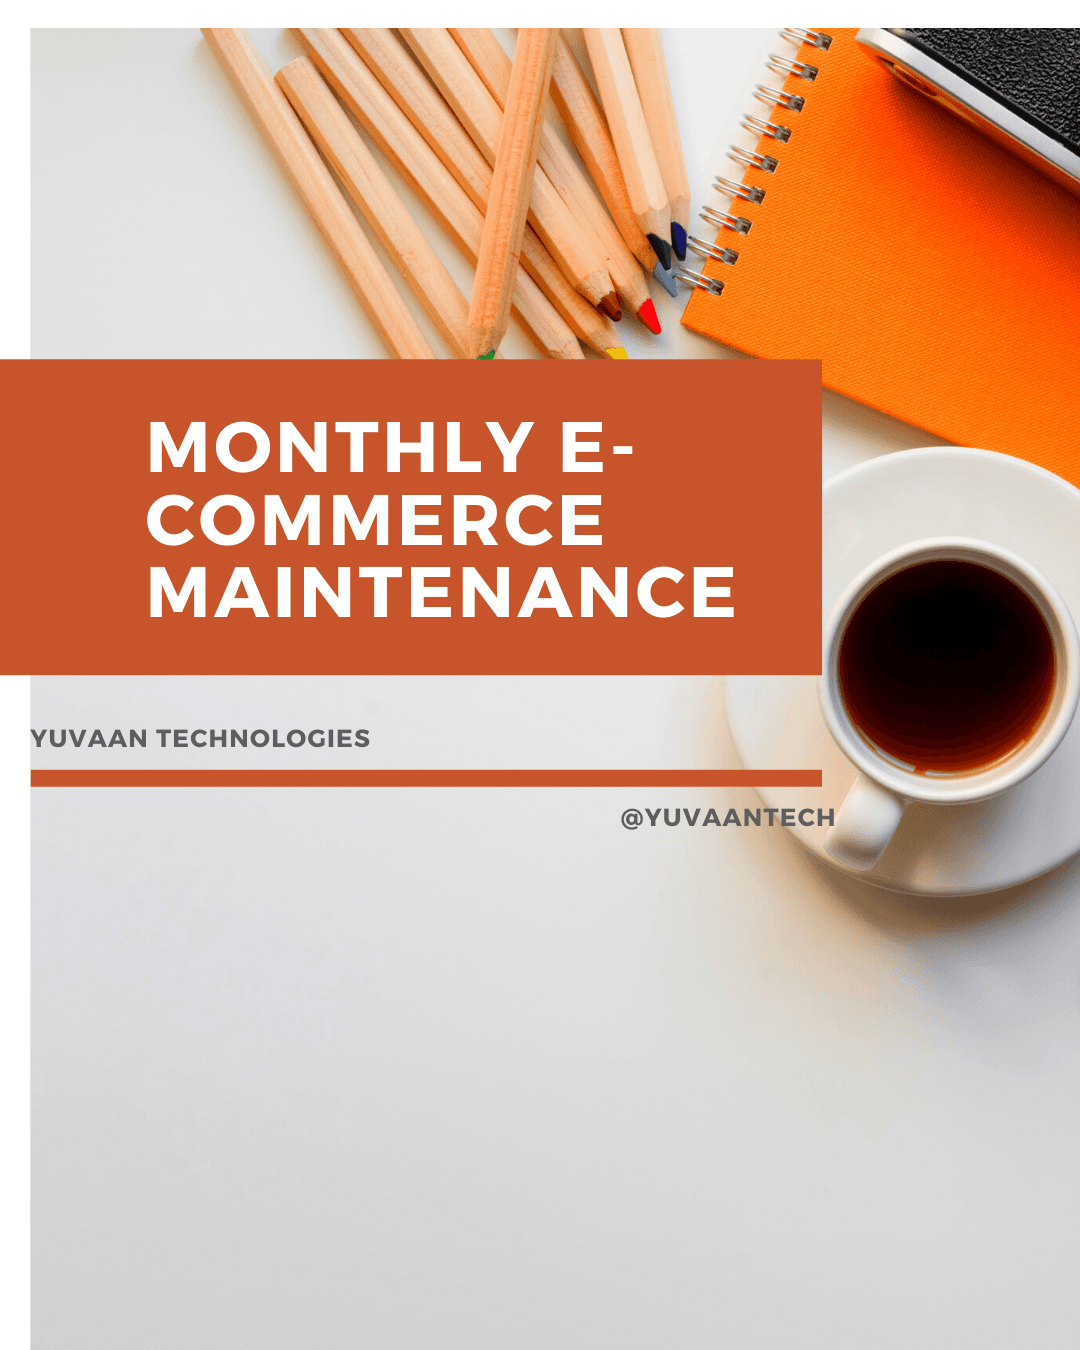 Product Monthly e-commerce Maintenance | Yuvaan Technologies image